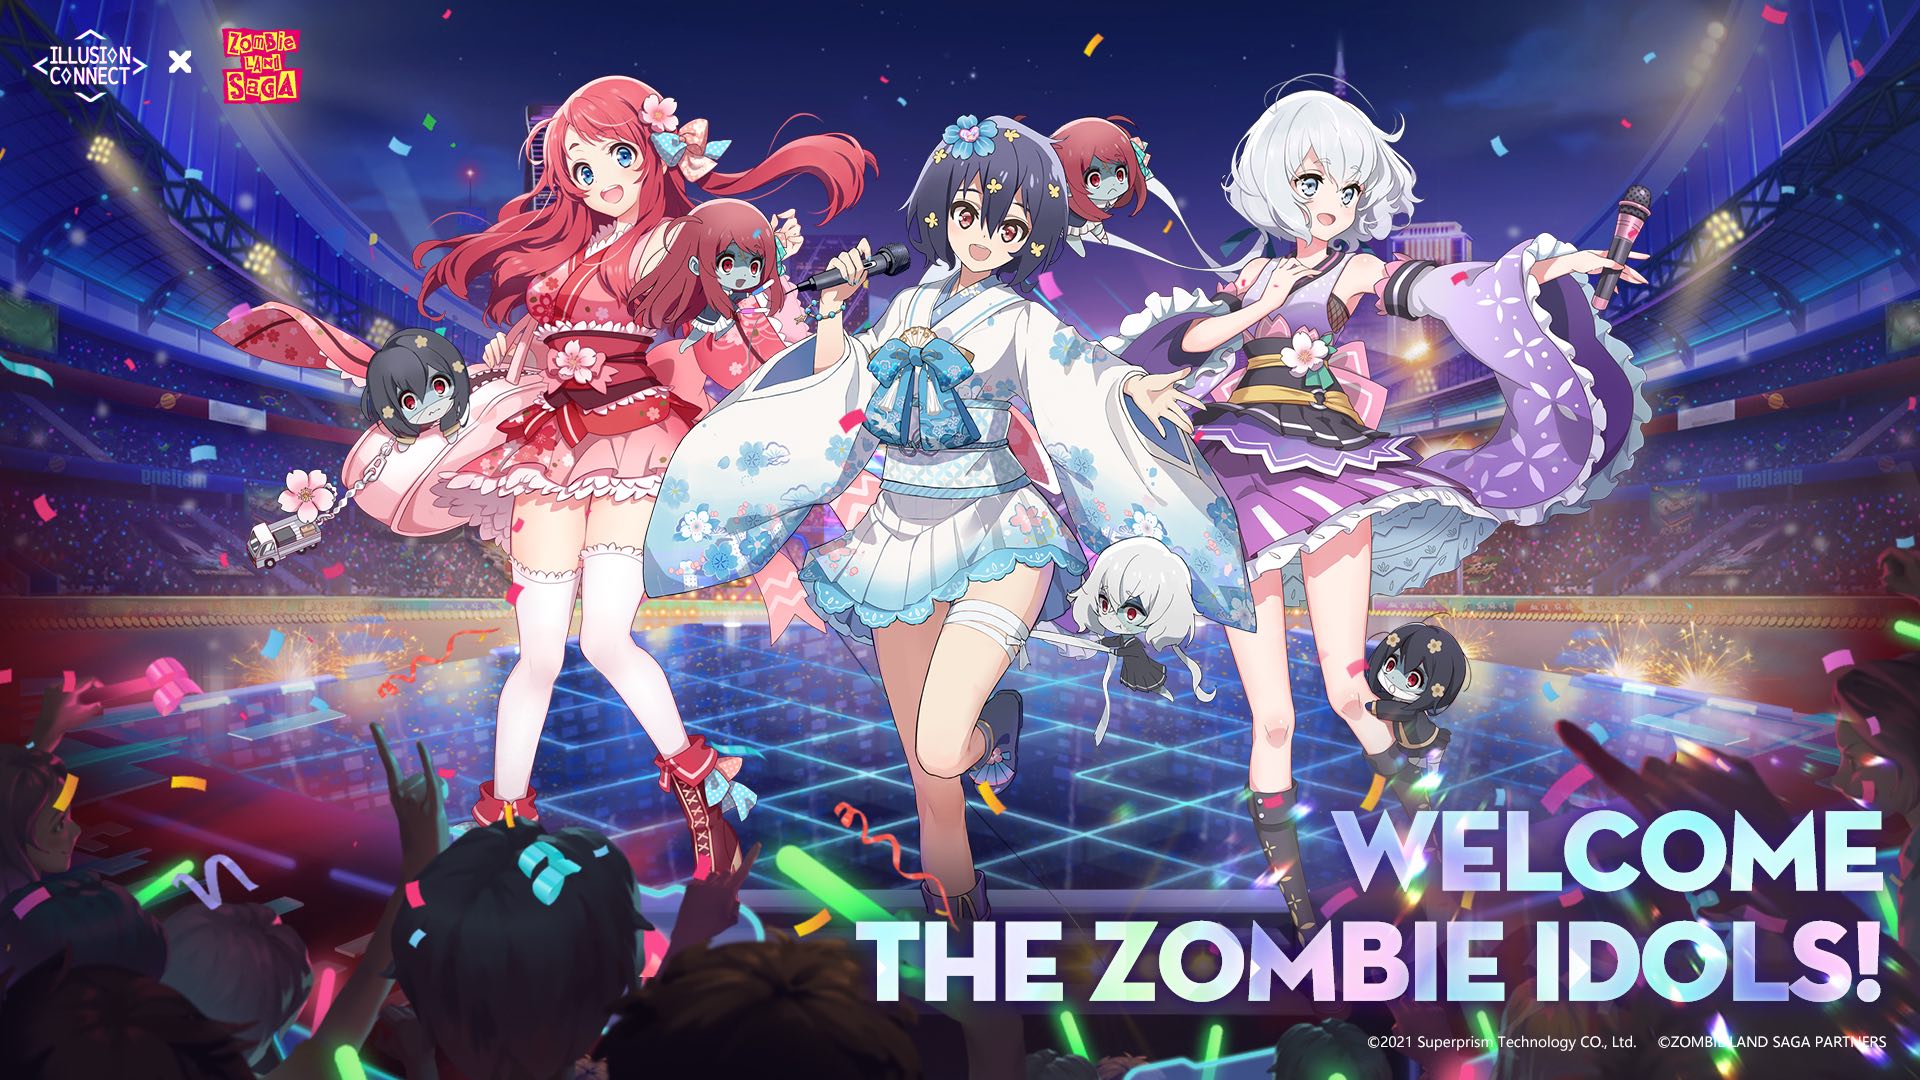 Popular Anime Series Zombie Land Saga teams up with Illusion Connect in Crossover Event